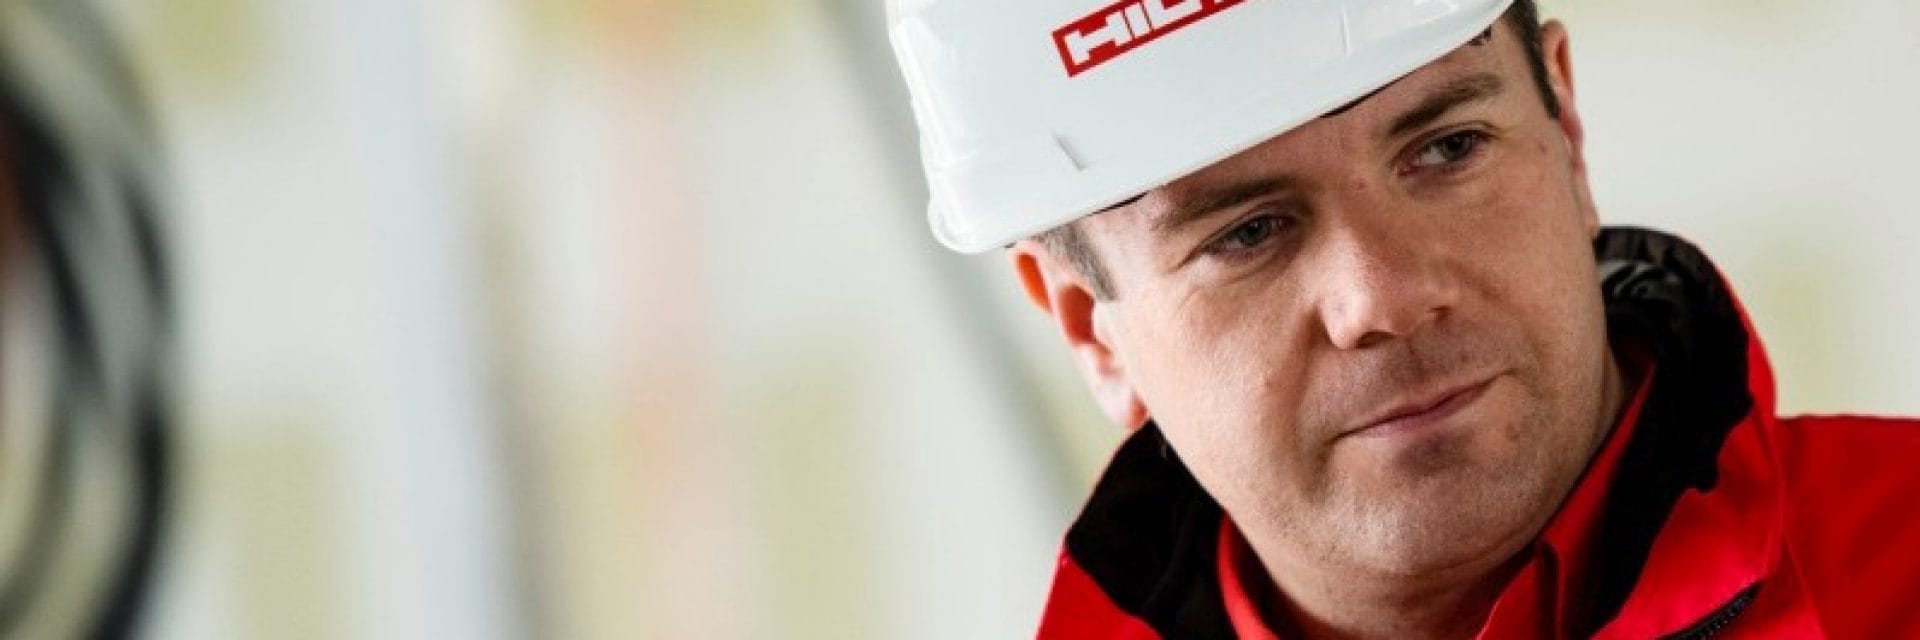 Hilti approach to corporate responsibility